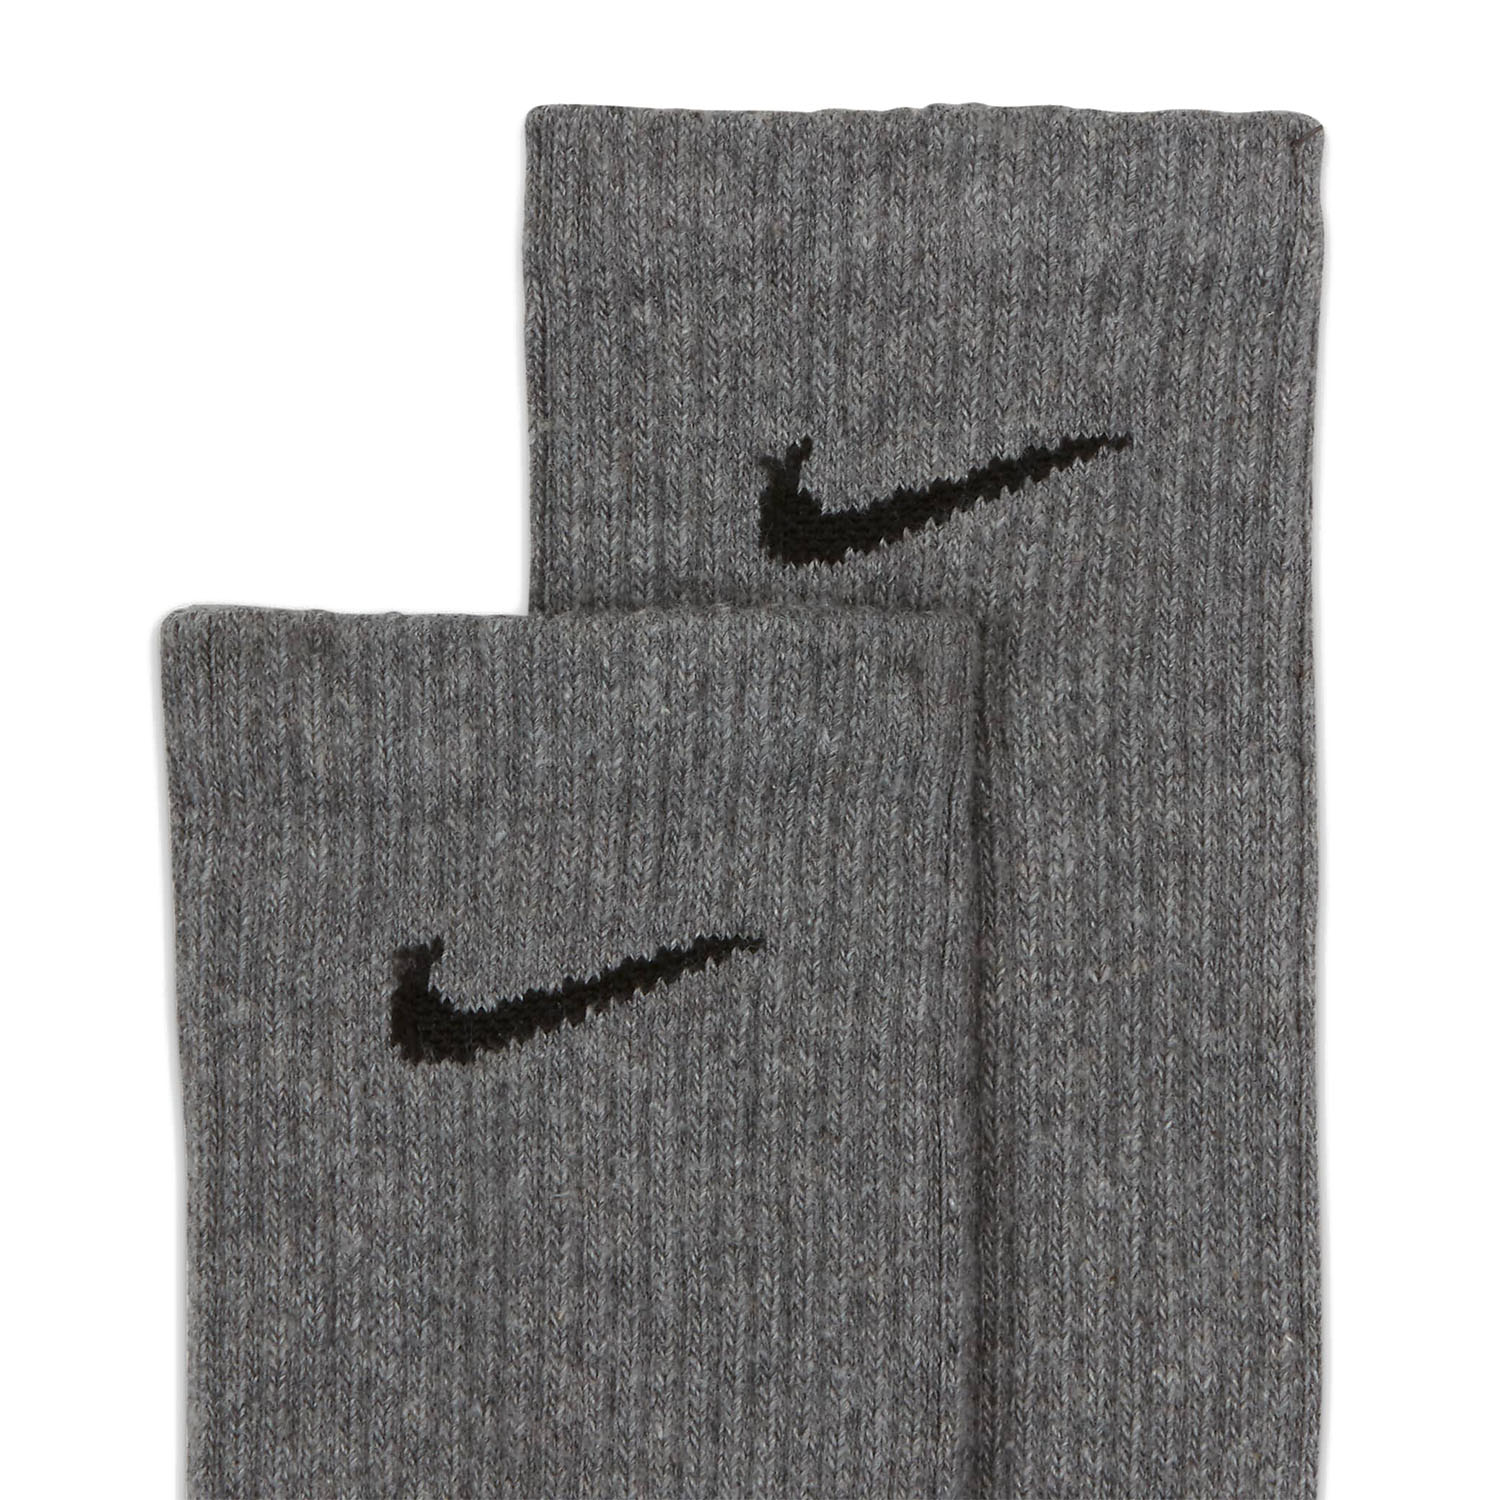 Nike Everyday Plus Cushioned x 6 Calcetines - Carbon Heather/Black